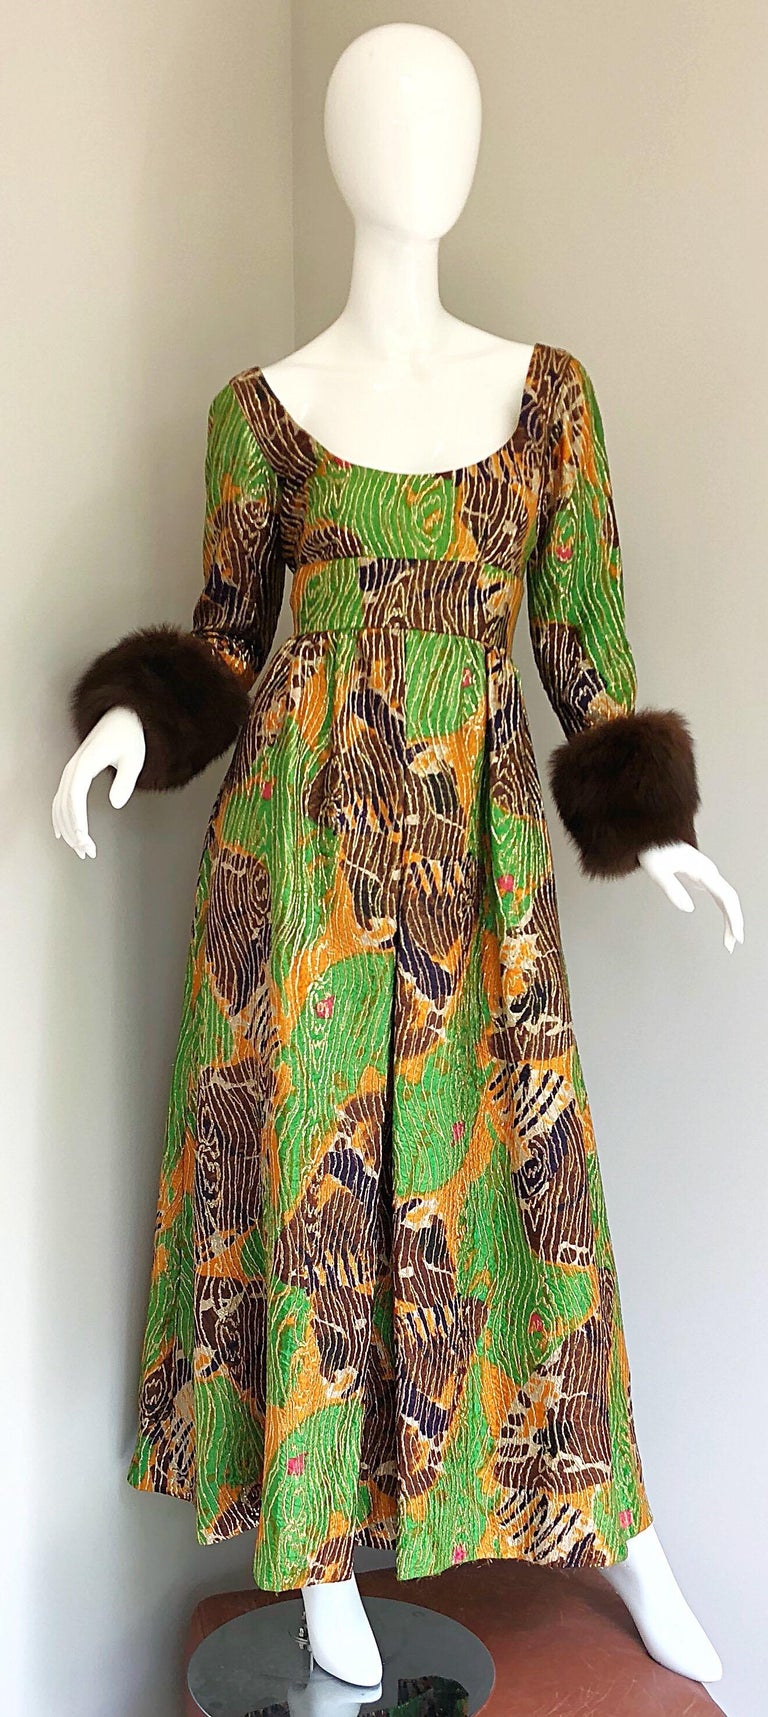 Stunning 1970s vintage LILLIE RUBIN green, purple and orange silk metallic gown! Features soft genuine mink fur sleeve cuffs. Fitted bodice with a full forgiving skirt. Abstract print in vibrant hues of green, purple, and marigold orange, with gold